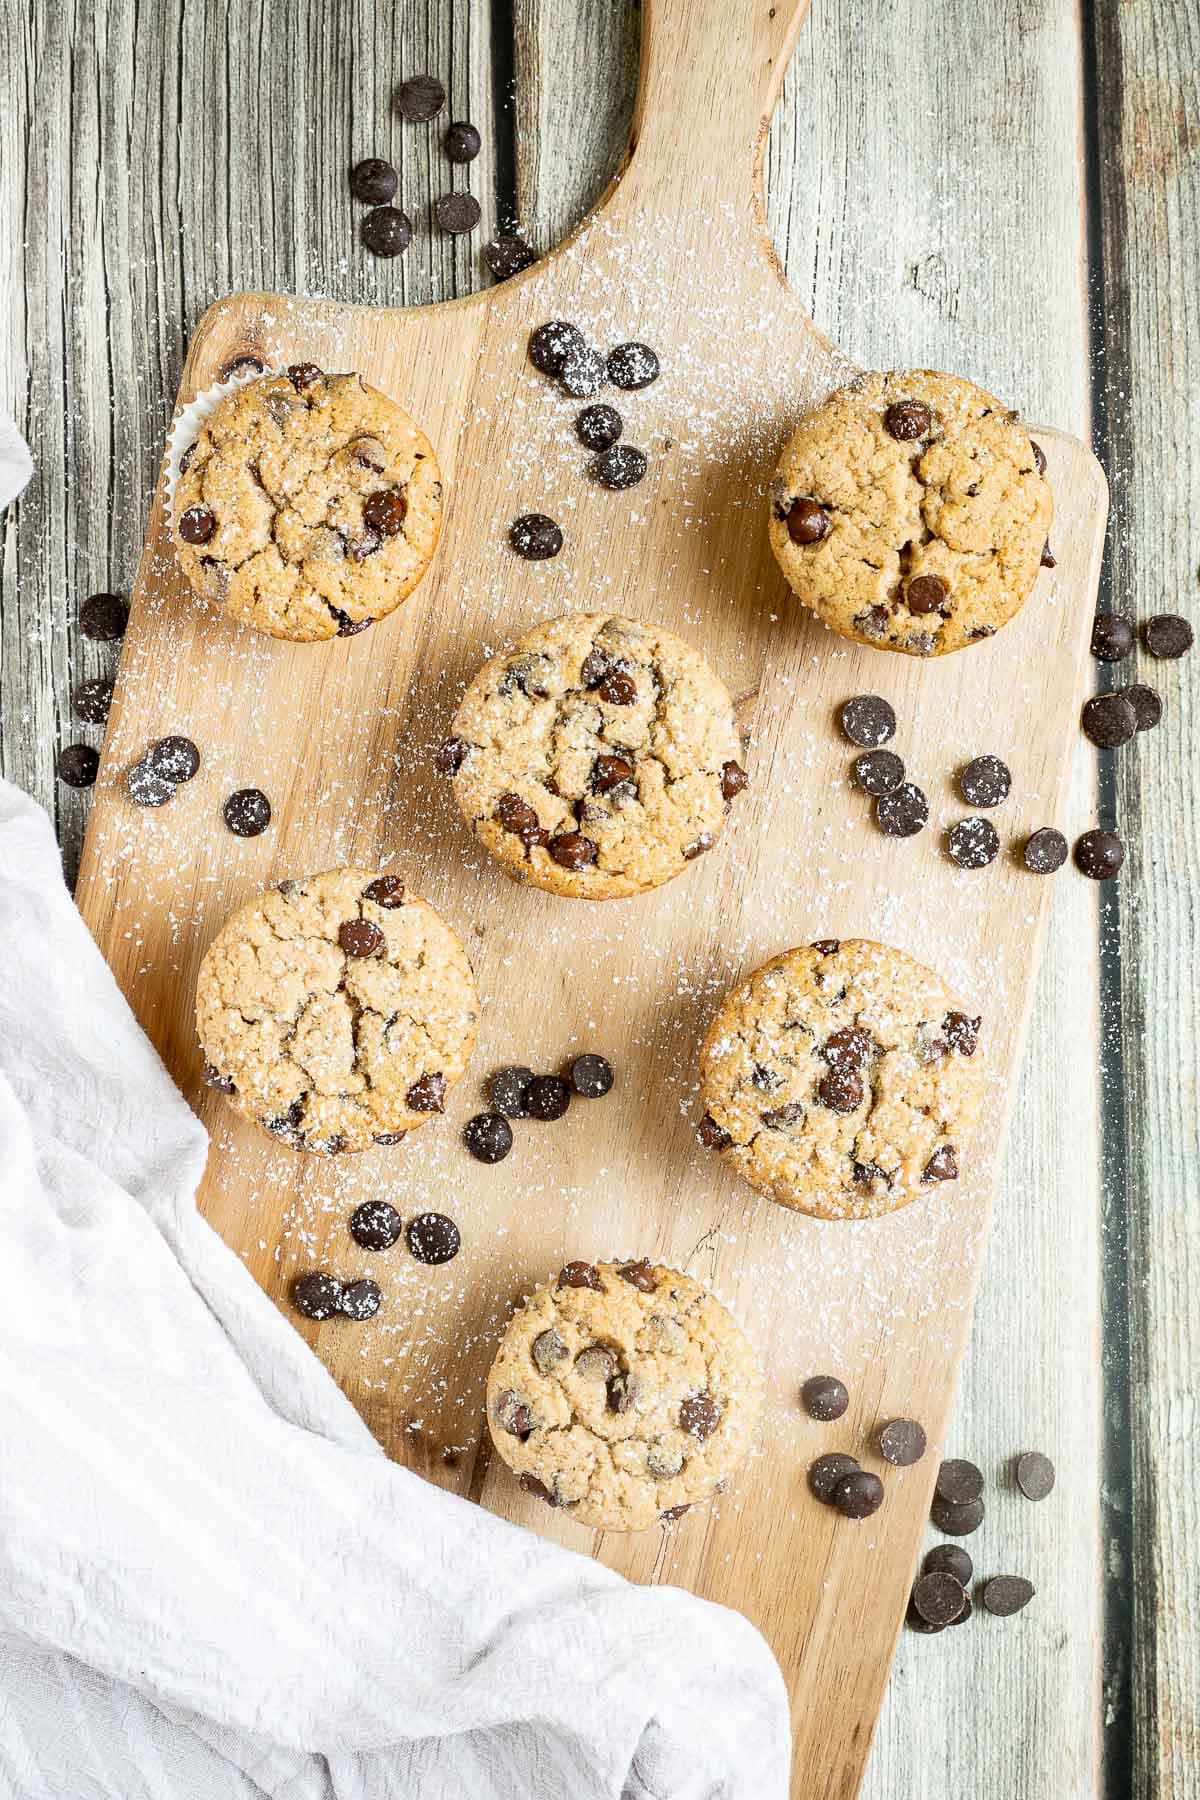 Chocolate chip muffins on a wooden board surrounded by lots of chocolate chips.